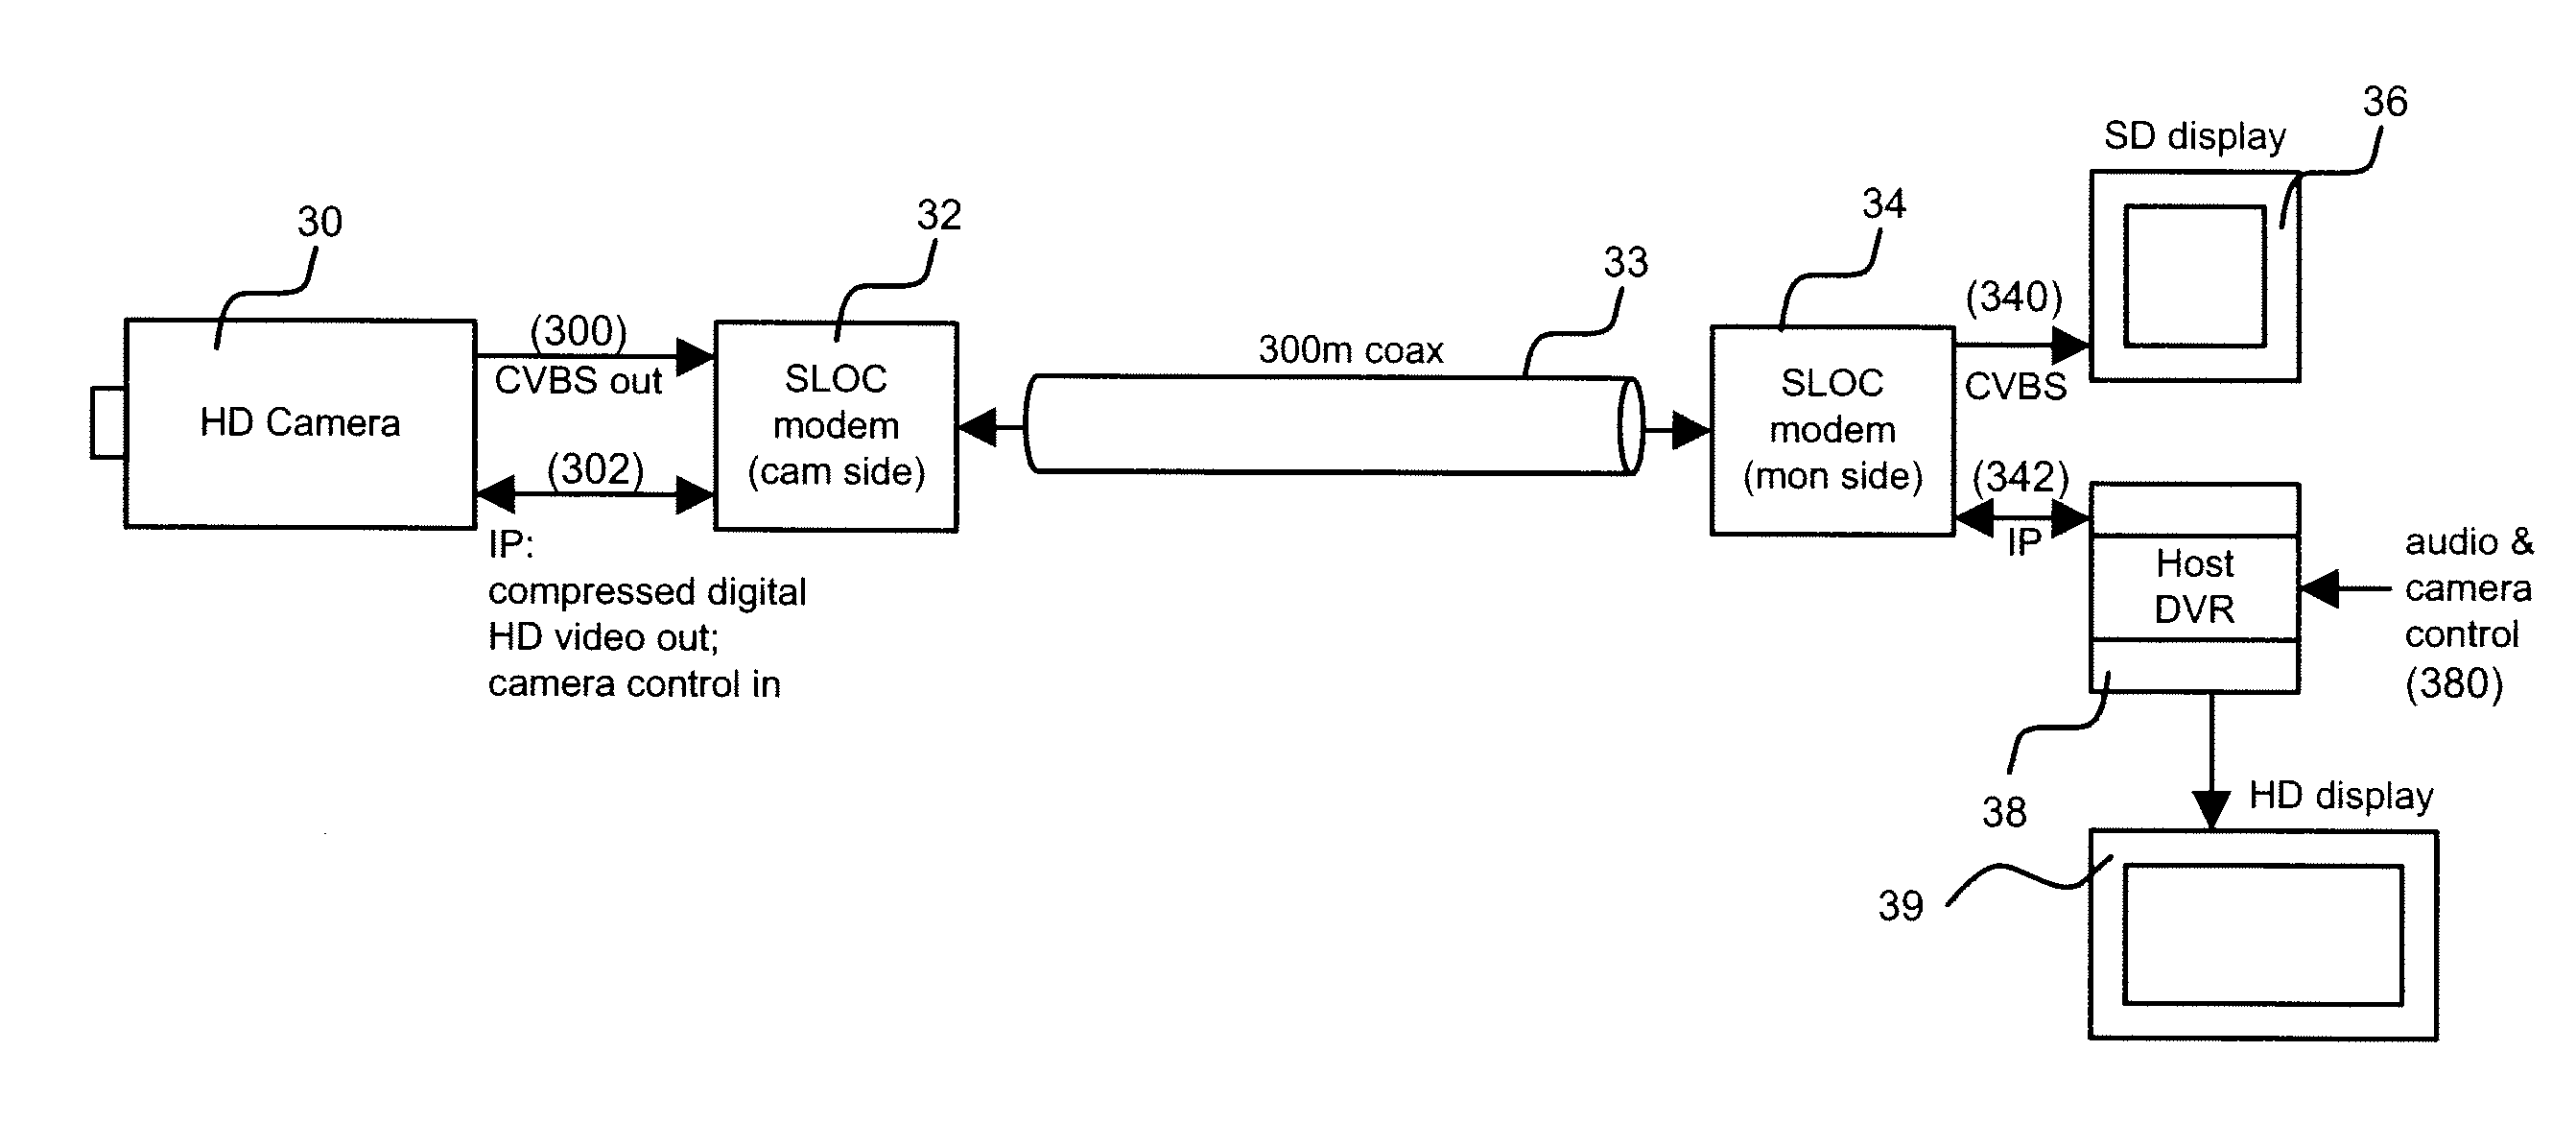 Analog equalizer systems and methods for baseband video signals